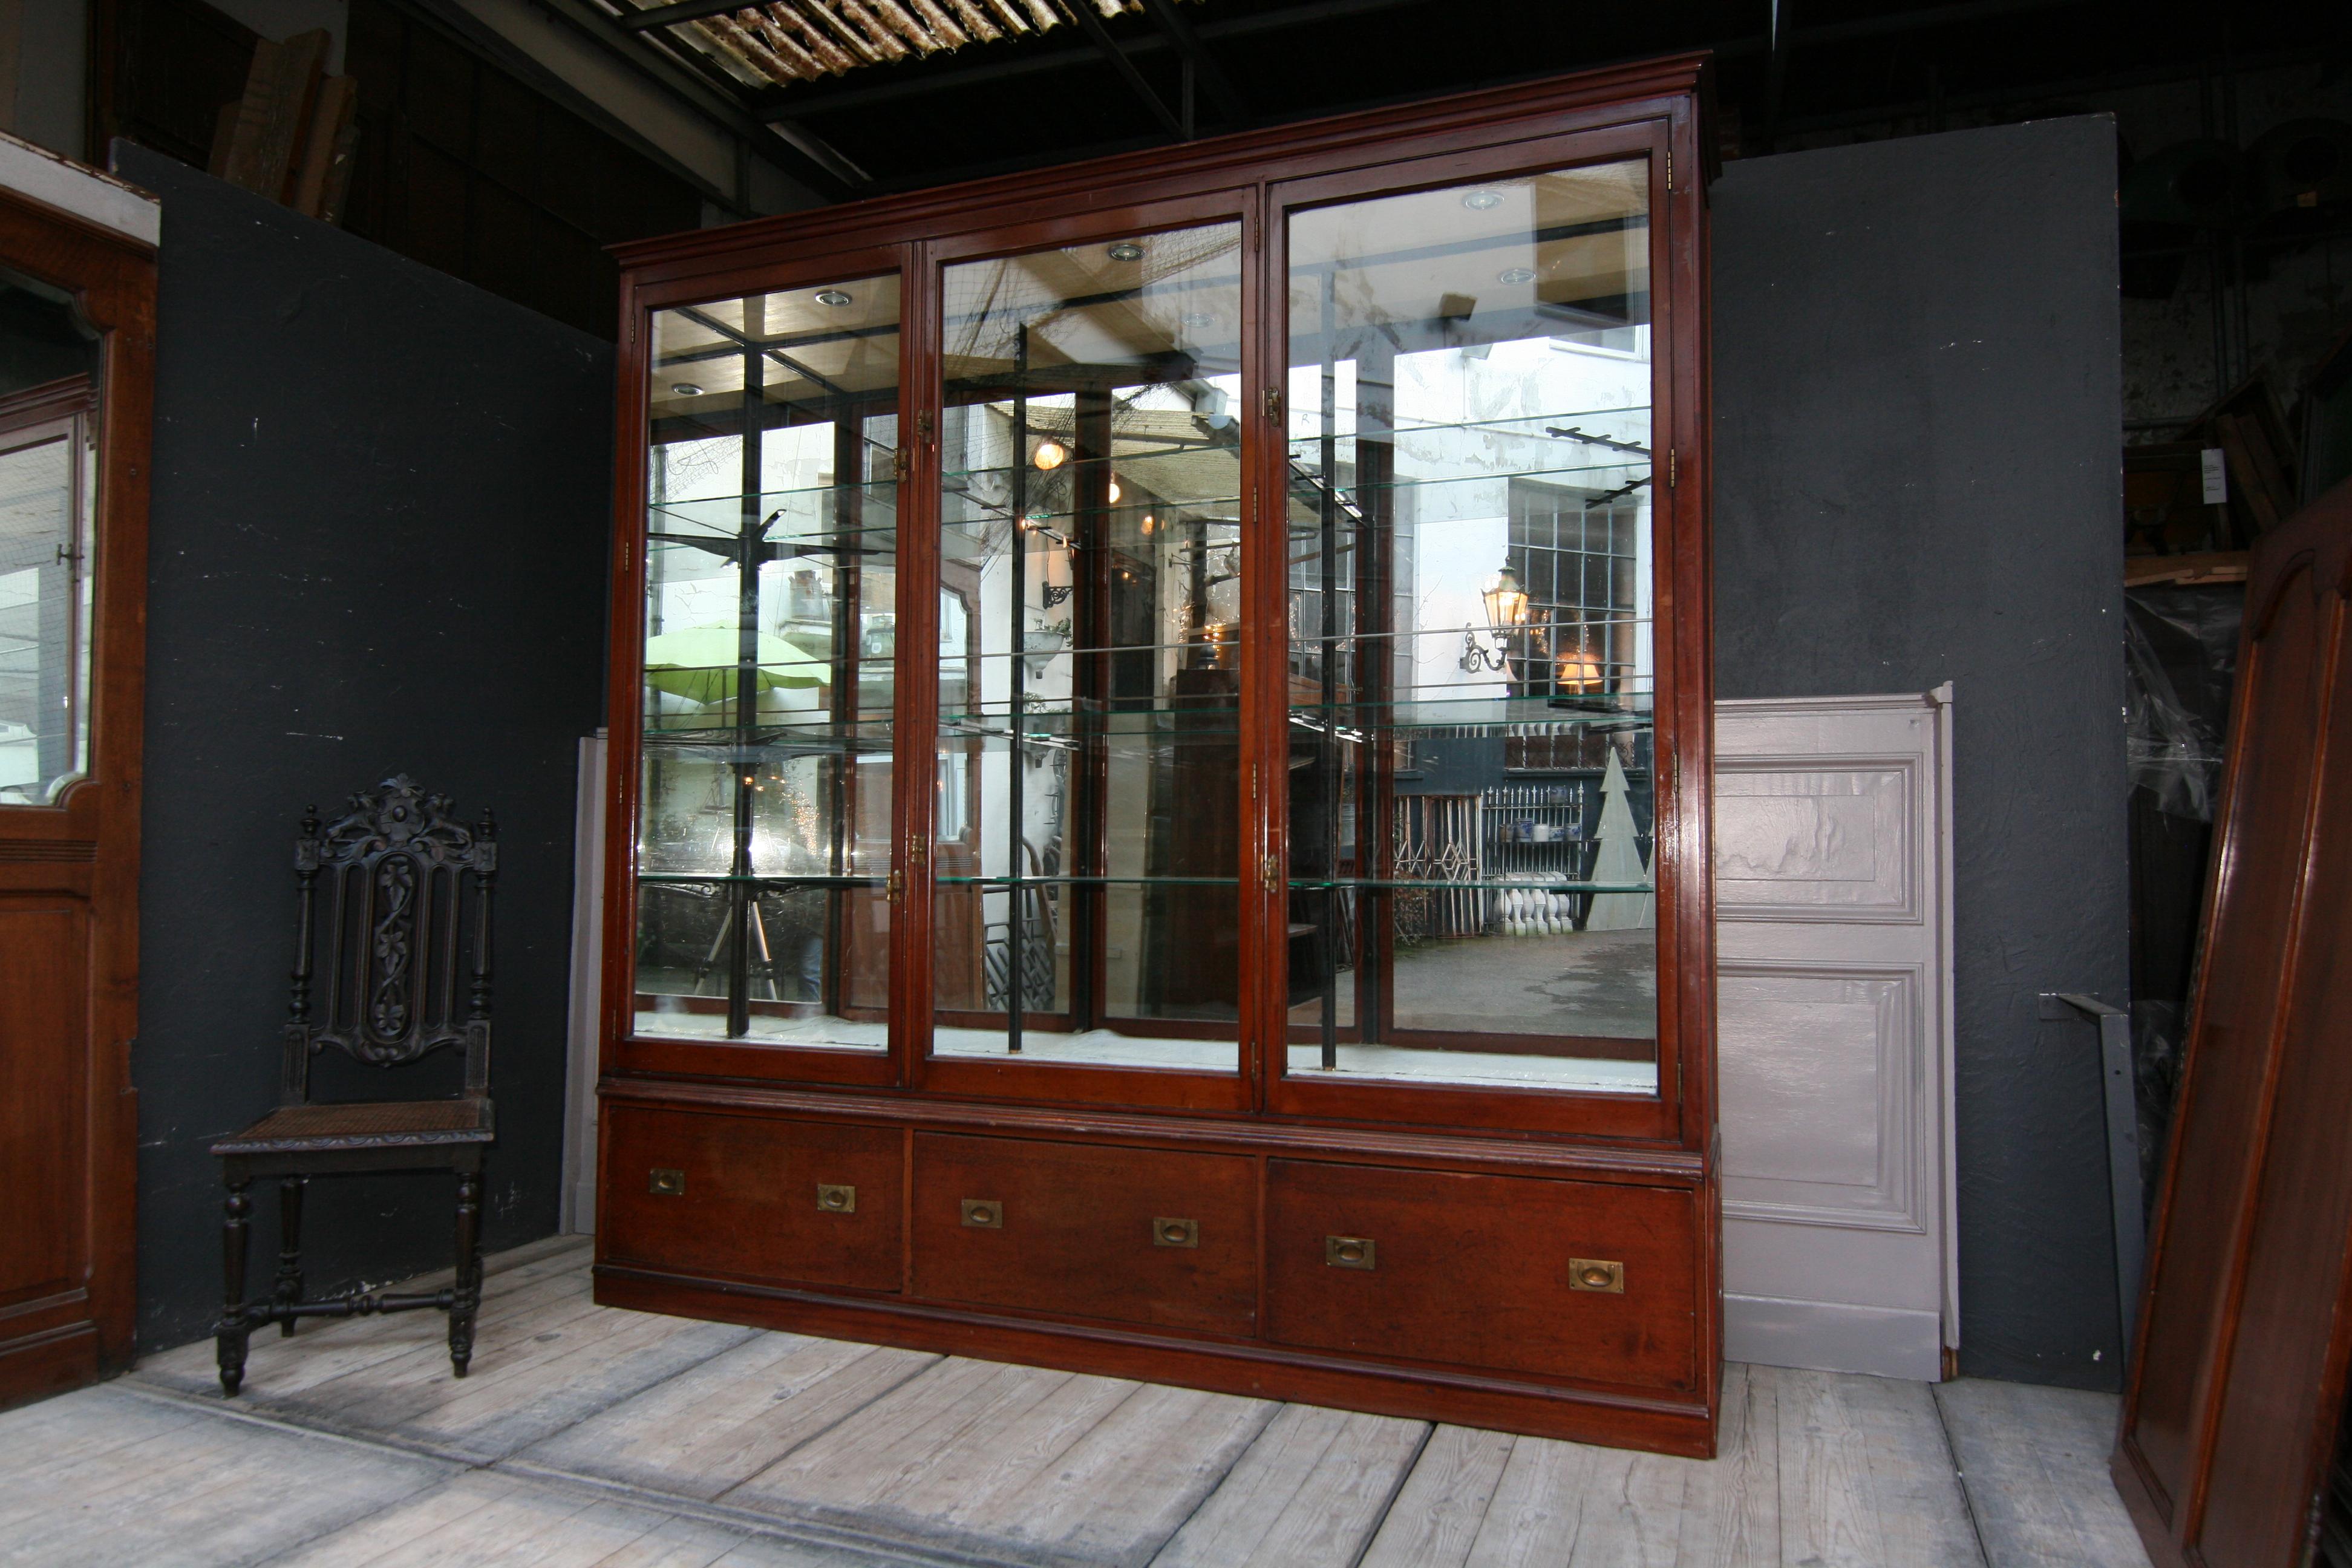 A large high quality English mahogany Victorian style display cabinet, from circa 1900.
The display cabinet consists of 2 parts. The base part features 3 large, finely mortised drawers with the typical brass handles. 
The vitrine top features 3